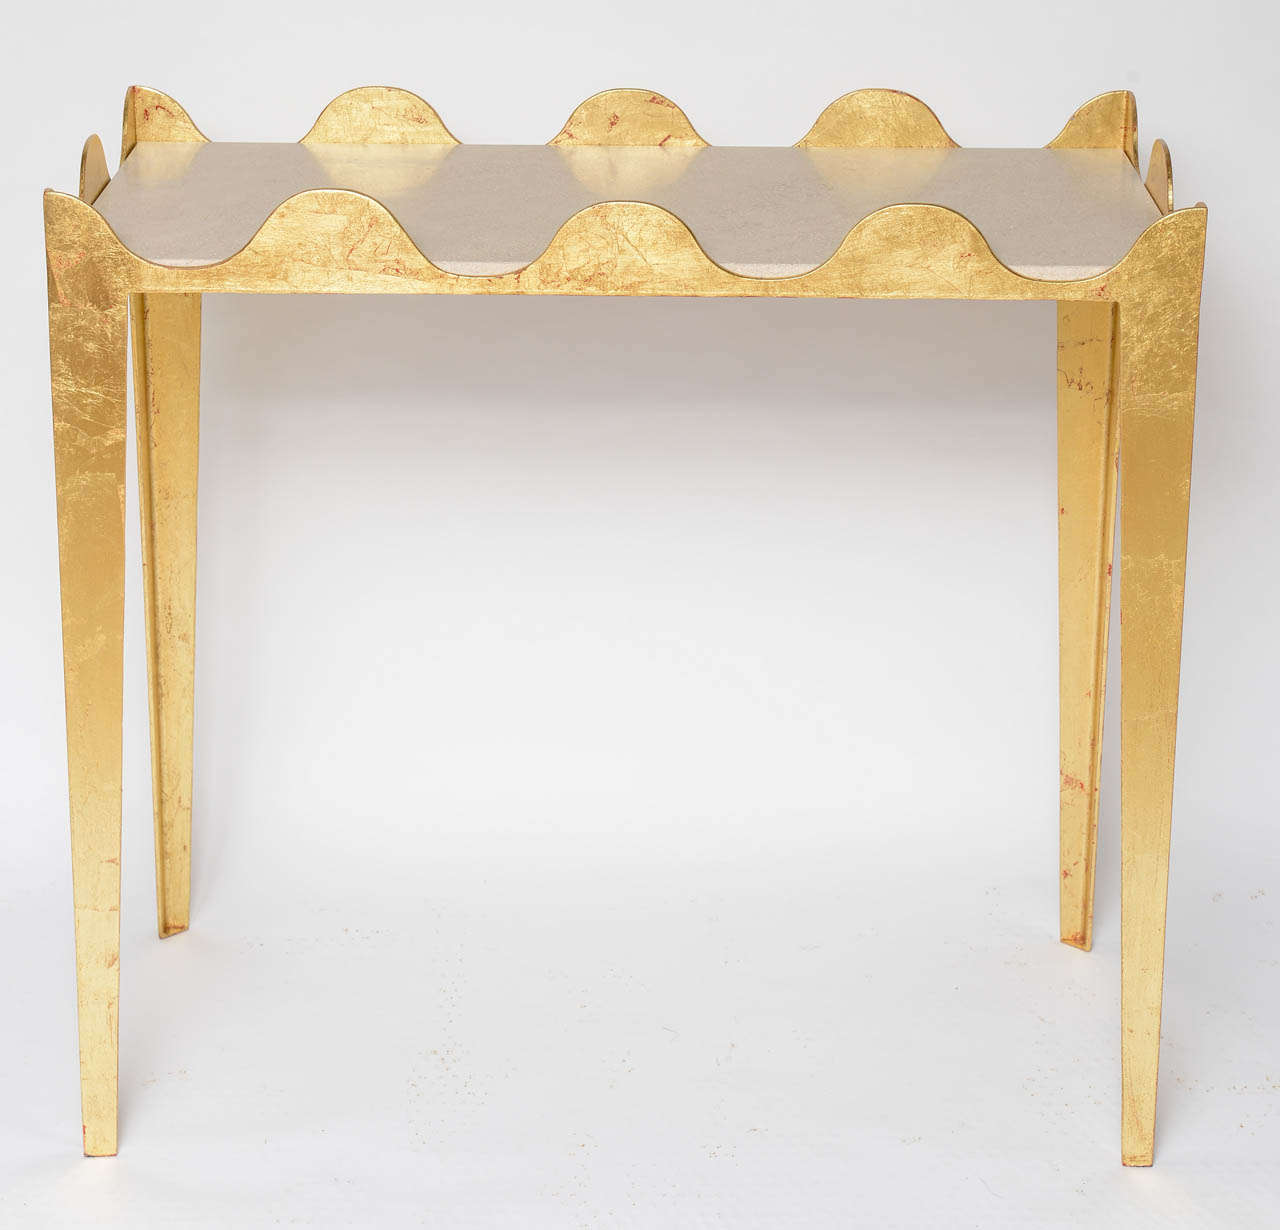 Pair of Console Tables in Gold Leaf Over Iron , w/ Portuguese Limestone tops. 
Can be used as consoles or serving tables.  Stunning!

This item is currently in our MIAMI facility. Please call or email us directly for details.